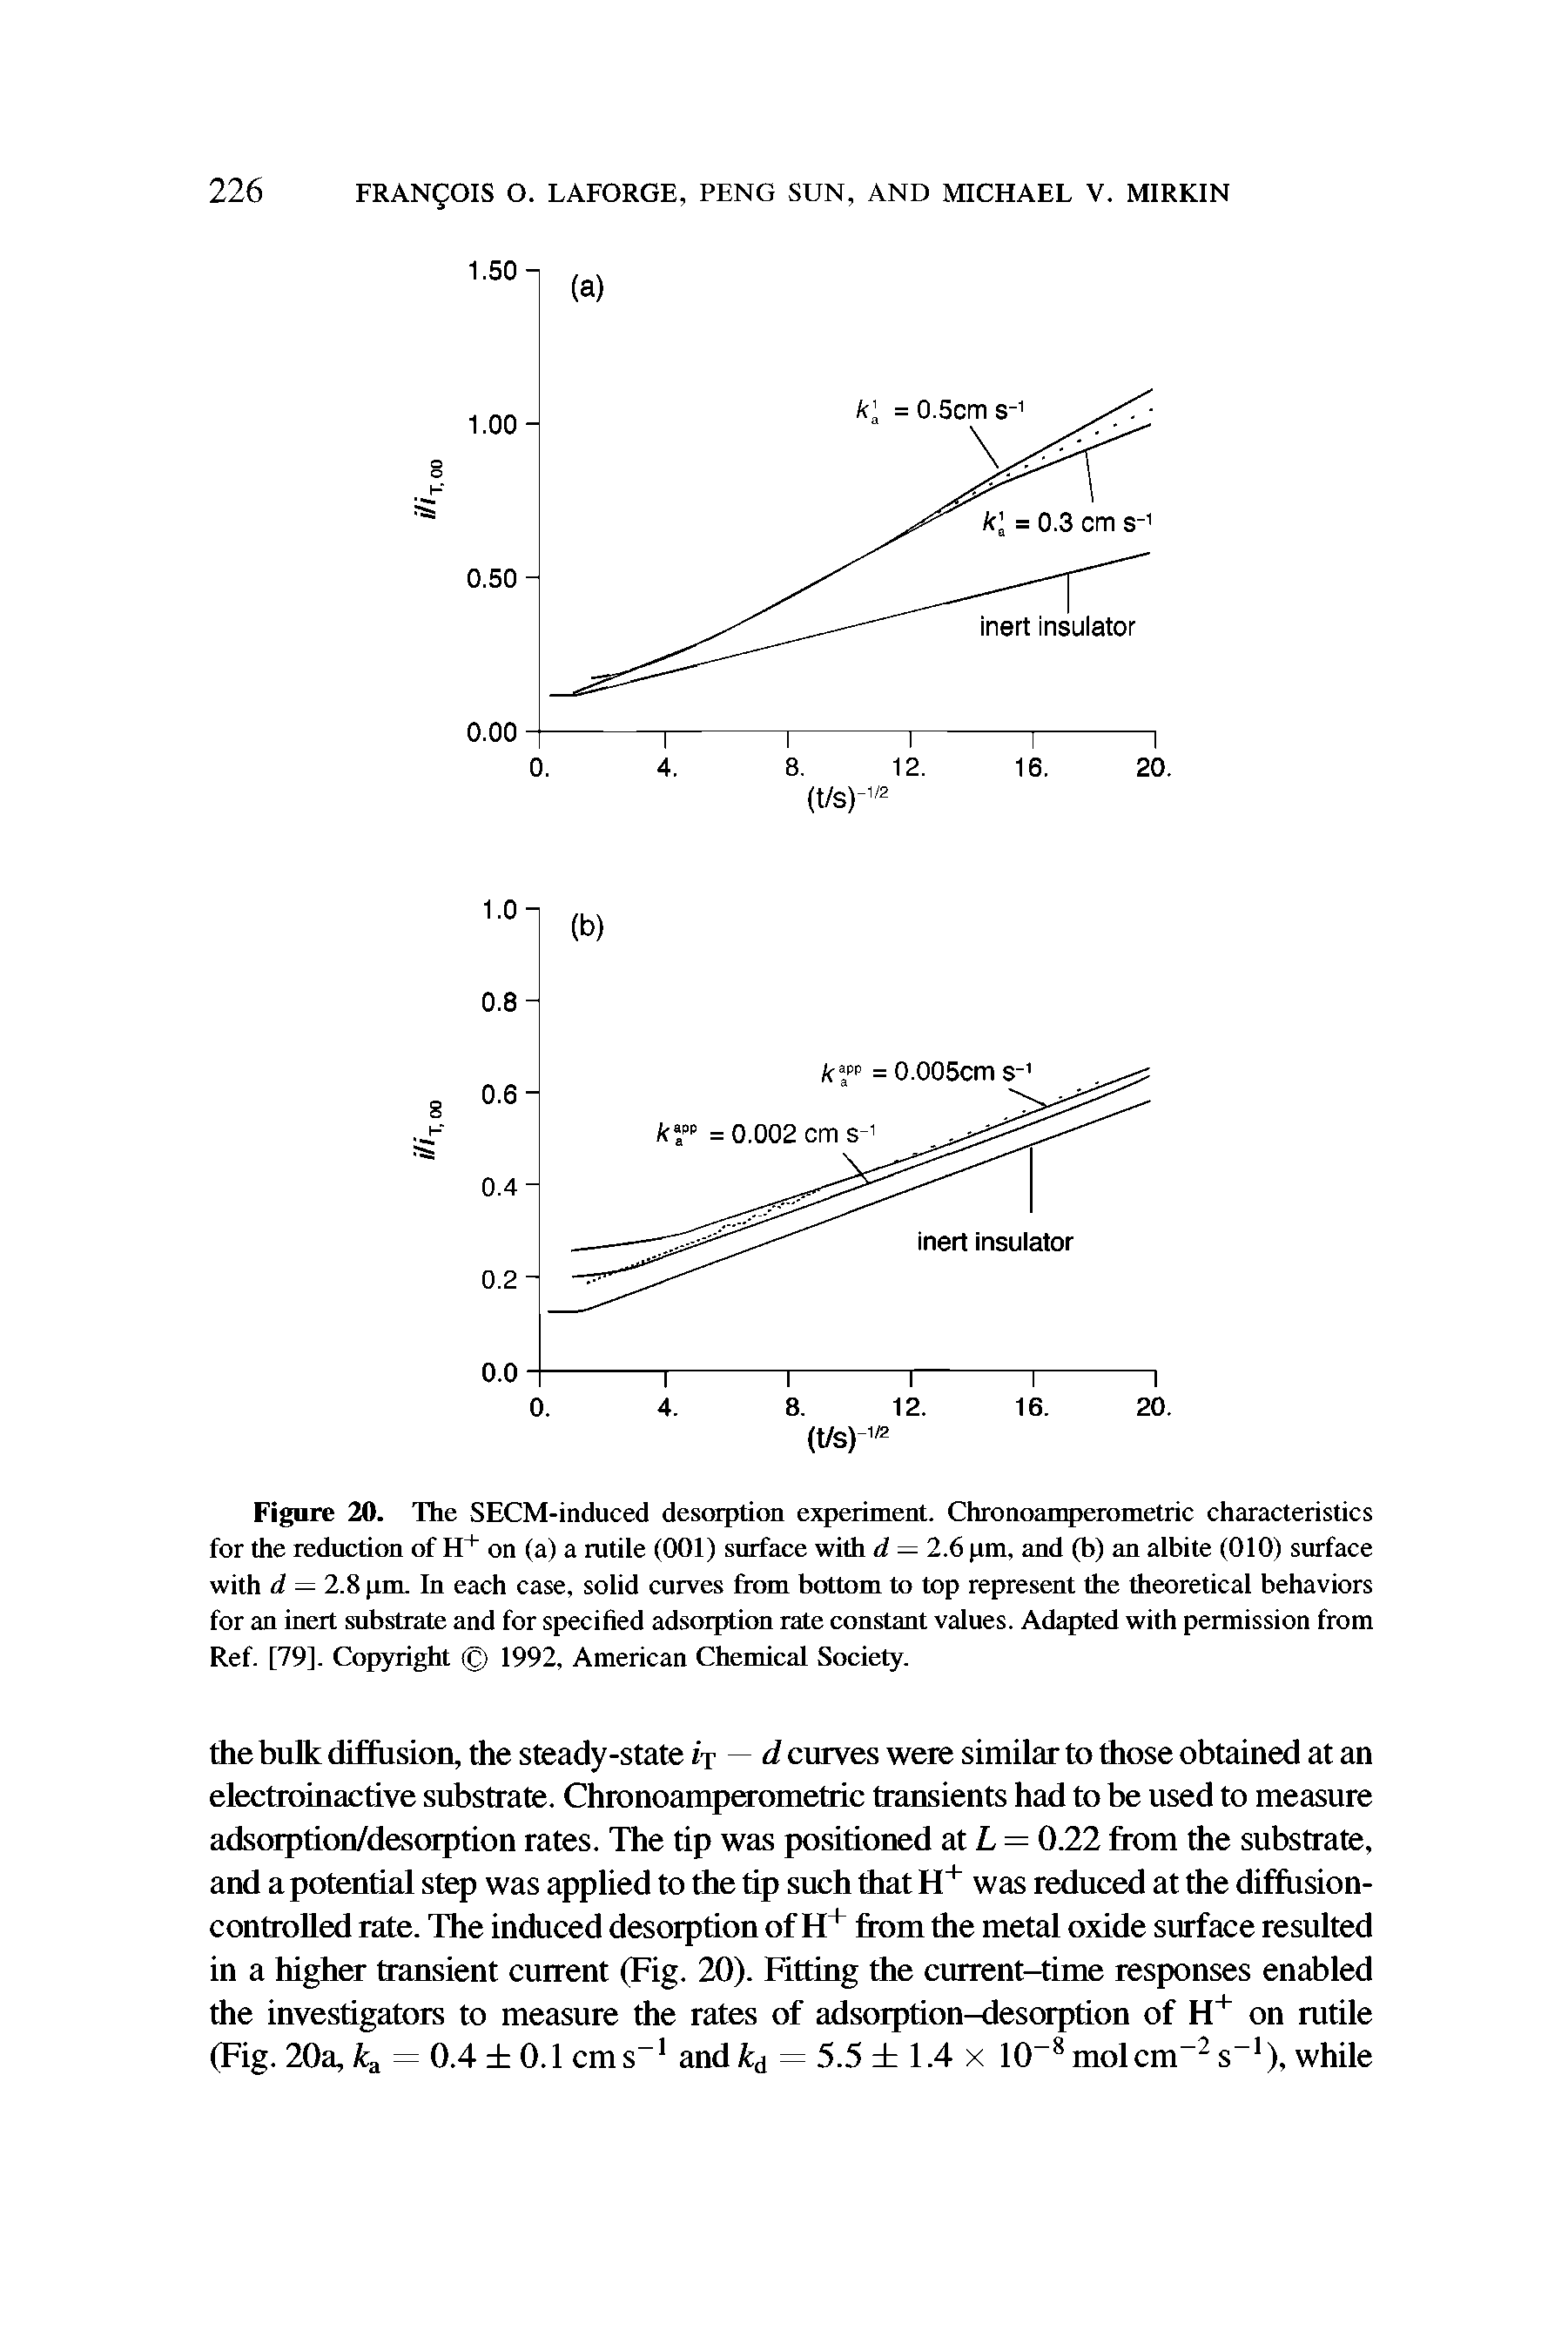 Figure 20. The SECM-induced desorption experiment. Chronoamperometric characteristics for the reduction of H+ on (a) a rutile (001) surface with d — 2.6 pm, and (b) an albite (010) surface with d — 2.8 pm In each case, solid curves from bottom to top represent the theoretical behaviors for an inert substrate and for specified adsorption rate constant values. Adapted with permission from Ref. [79]. Copyright (g) 1992, American Chemical Society.